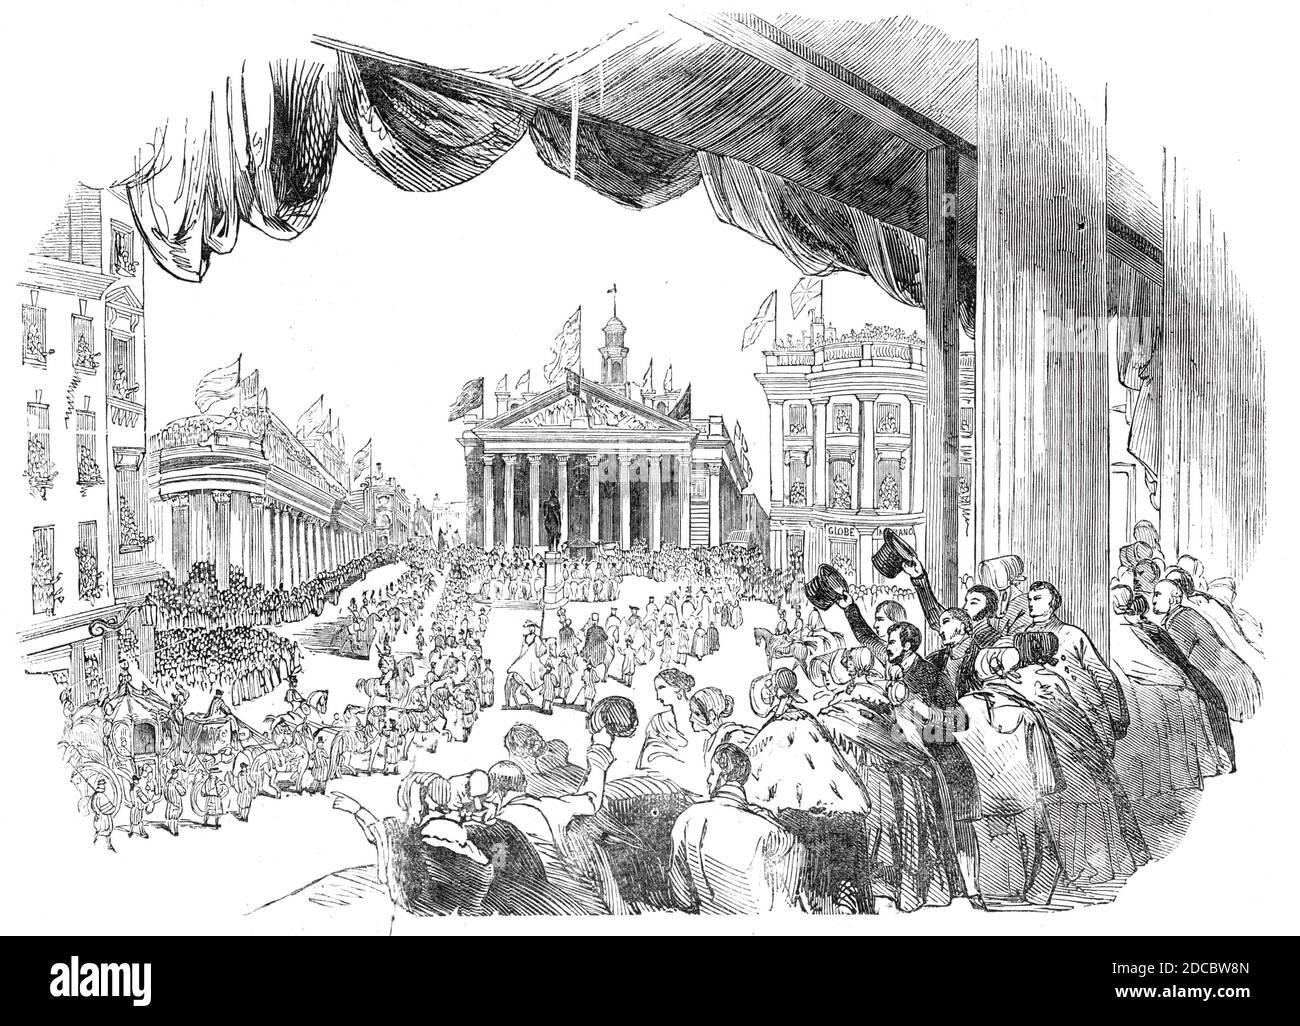 The Procession passing the Mansion House, 1844. Opening of the new Royal Exchange building in the City of London. The building was designed by Sir William Tite and was officially opened by Queen Victoria. From &quot;Illustrated London News&quot;, 1844, Vol I. Stock Photo